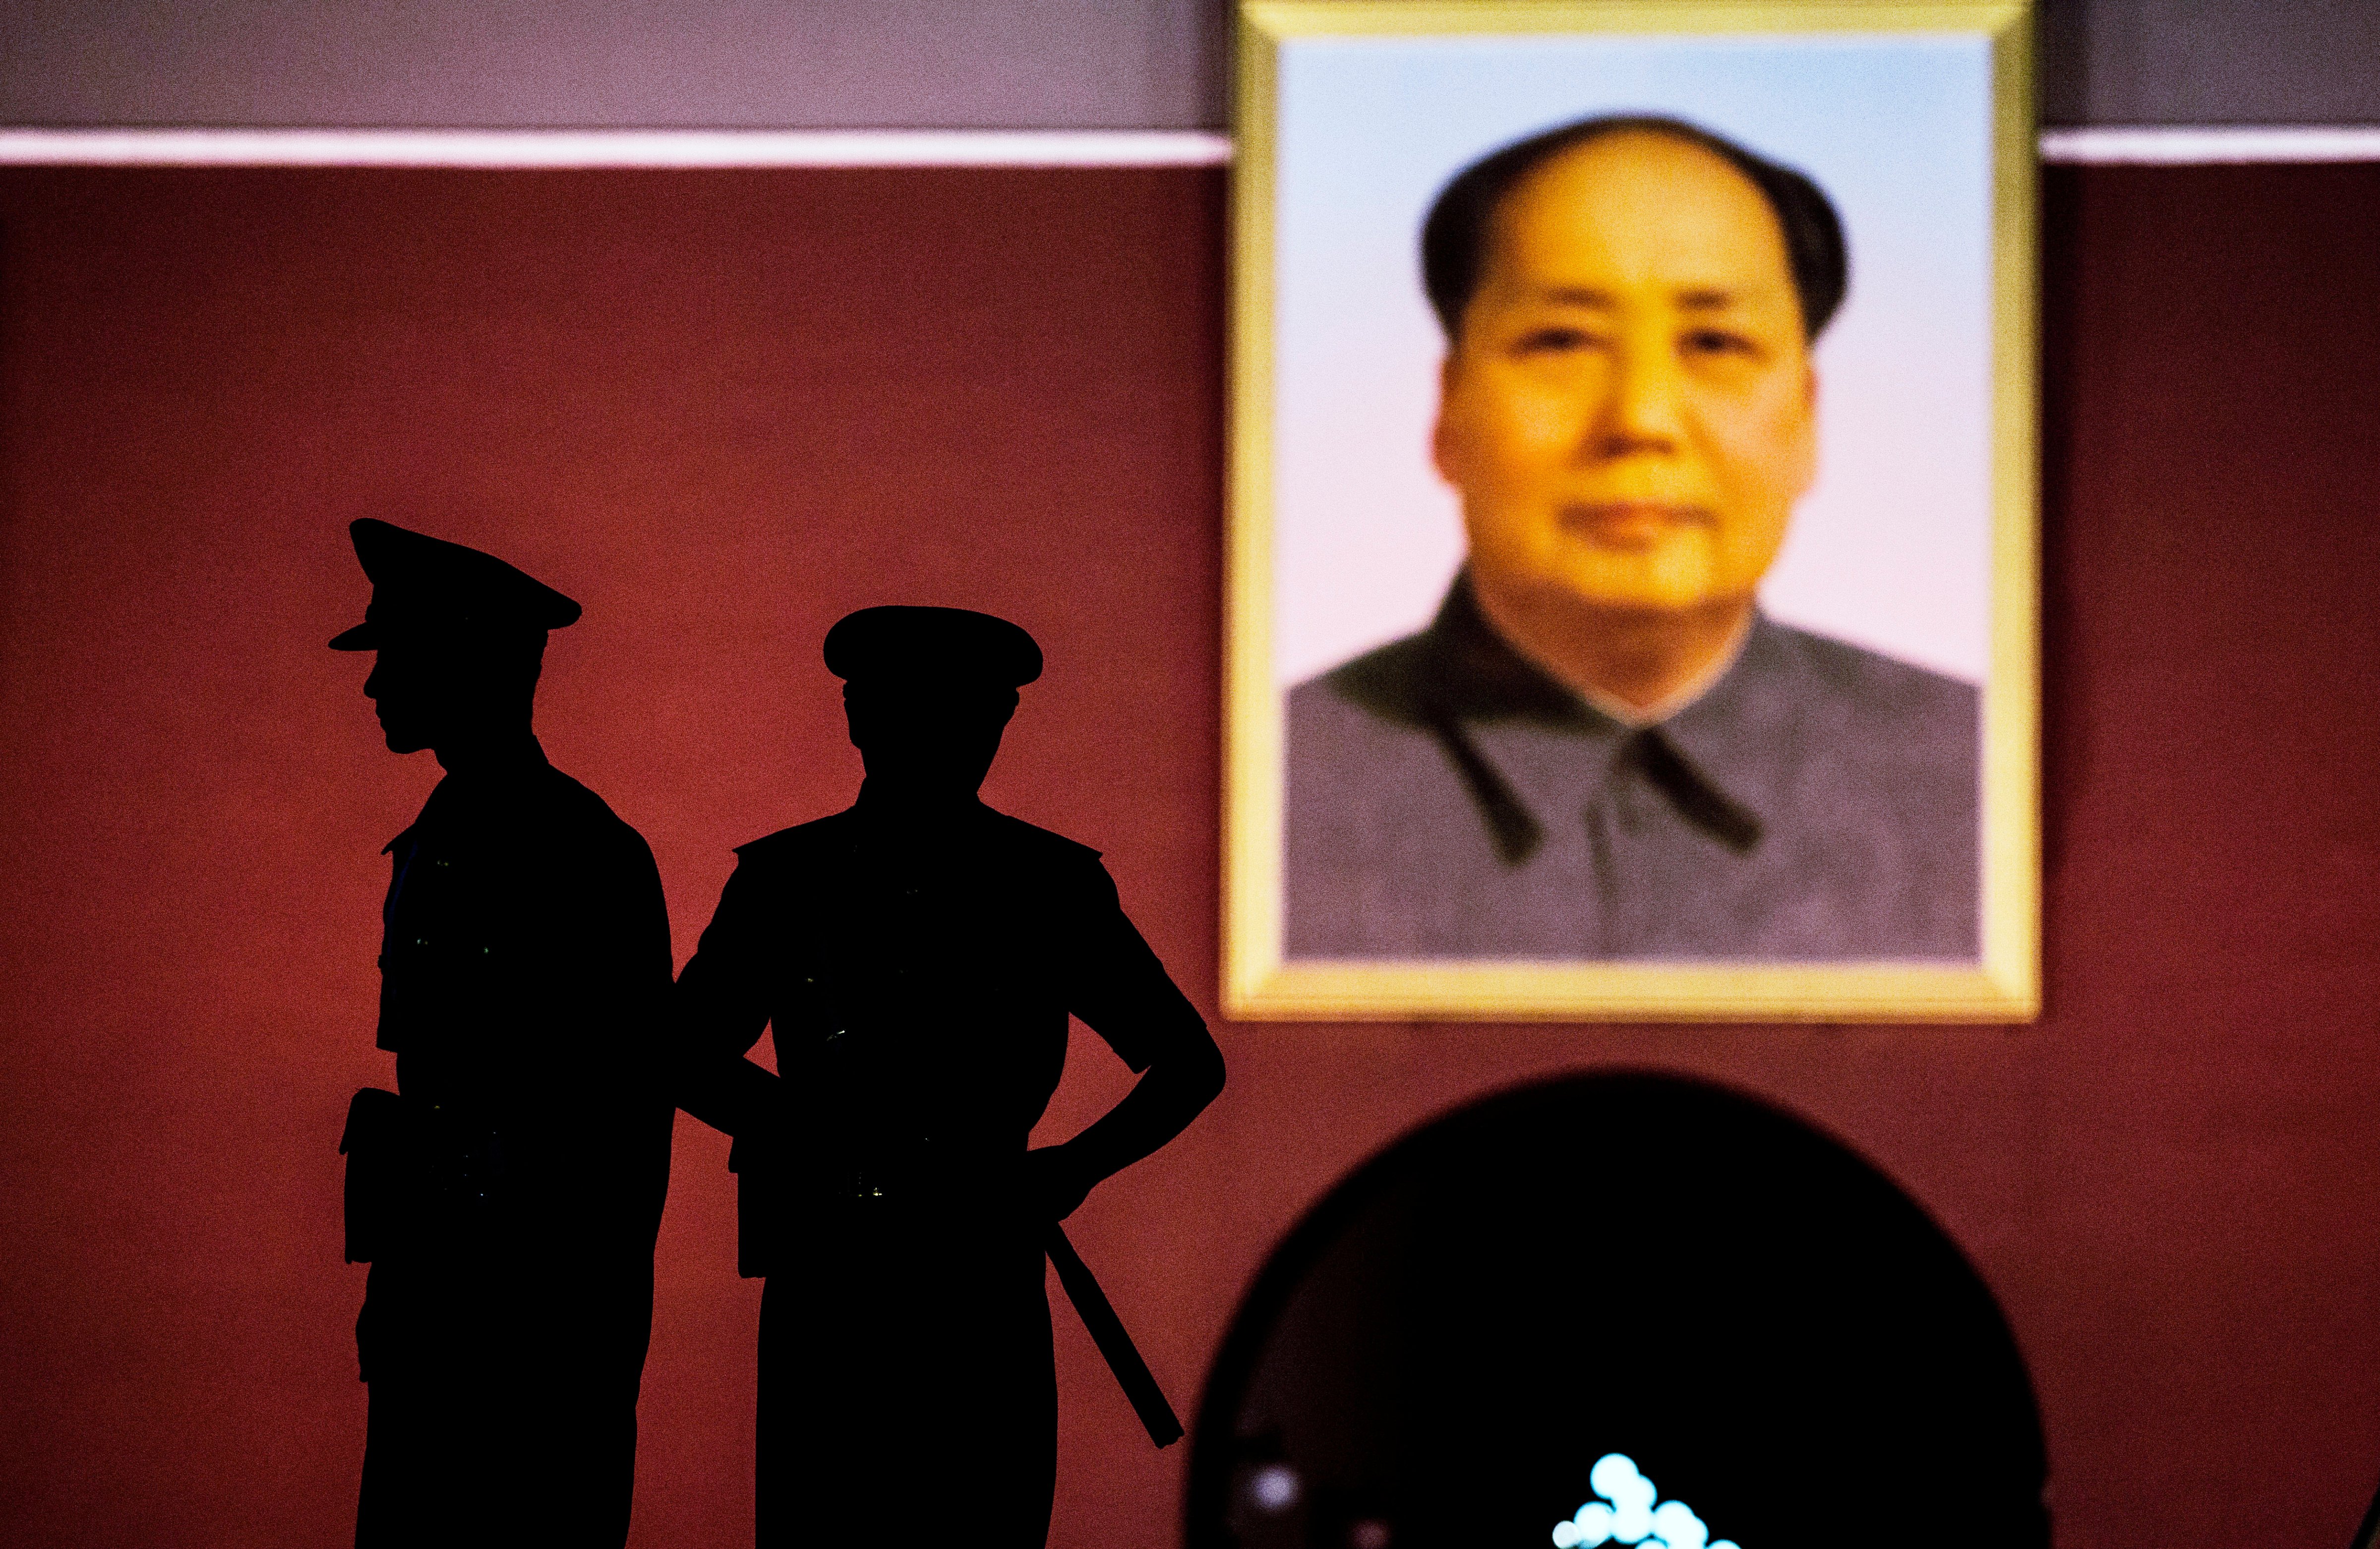 Chinese Paramilitary security force officers stand under a portrait of the late Mao Zedong outside the Forbidden City at Tiananmen Square on June 2, 2014 in Beijing, China. (Kevin Frayer—Getty Images)